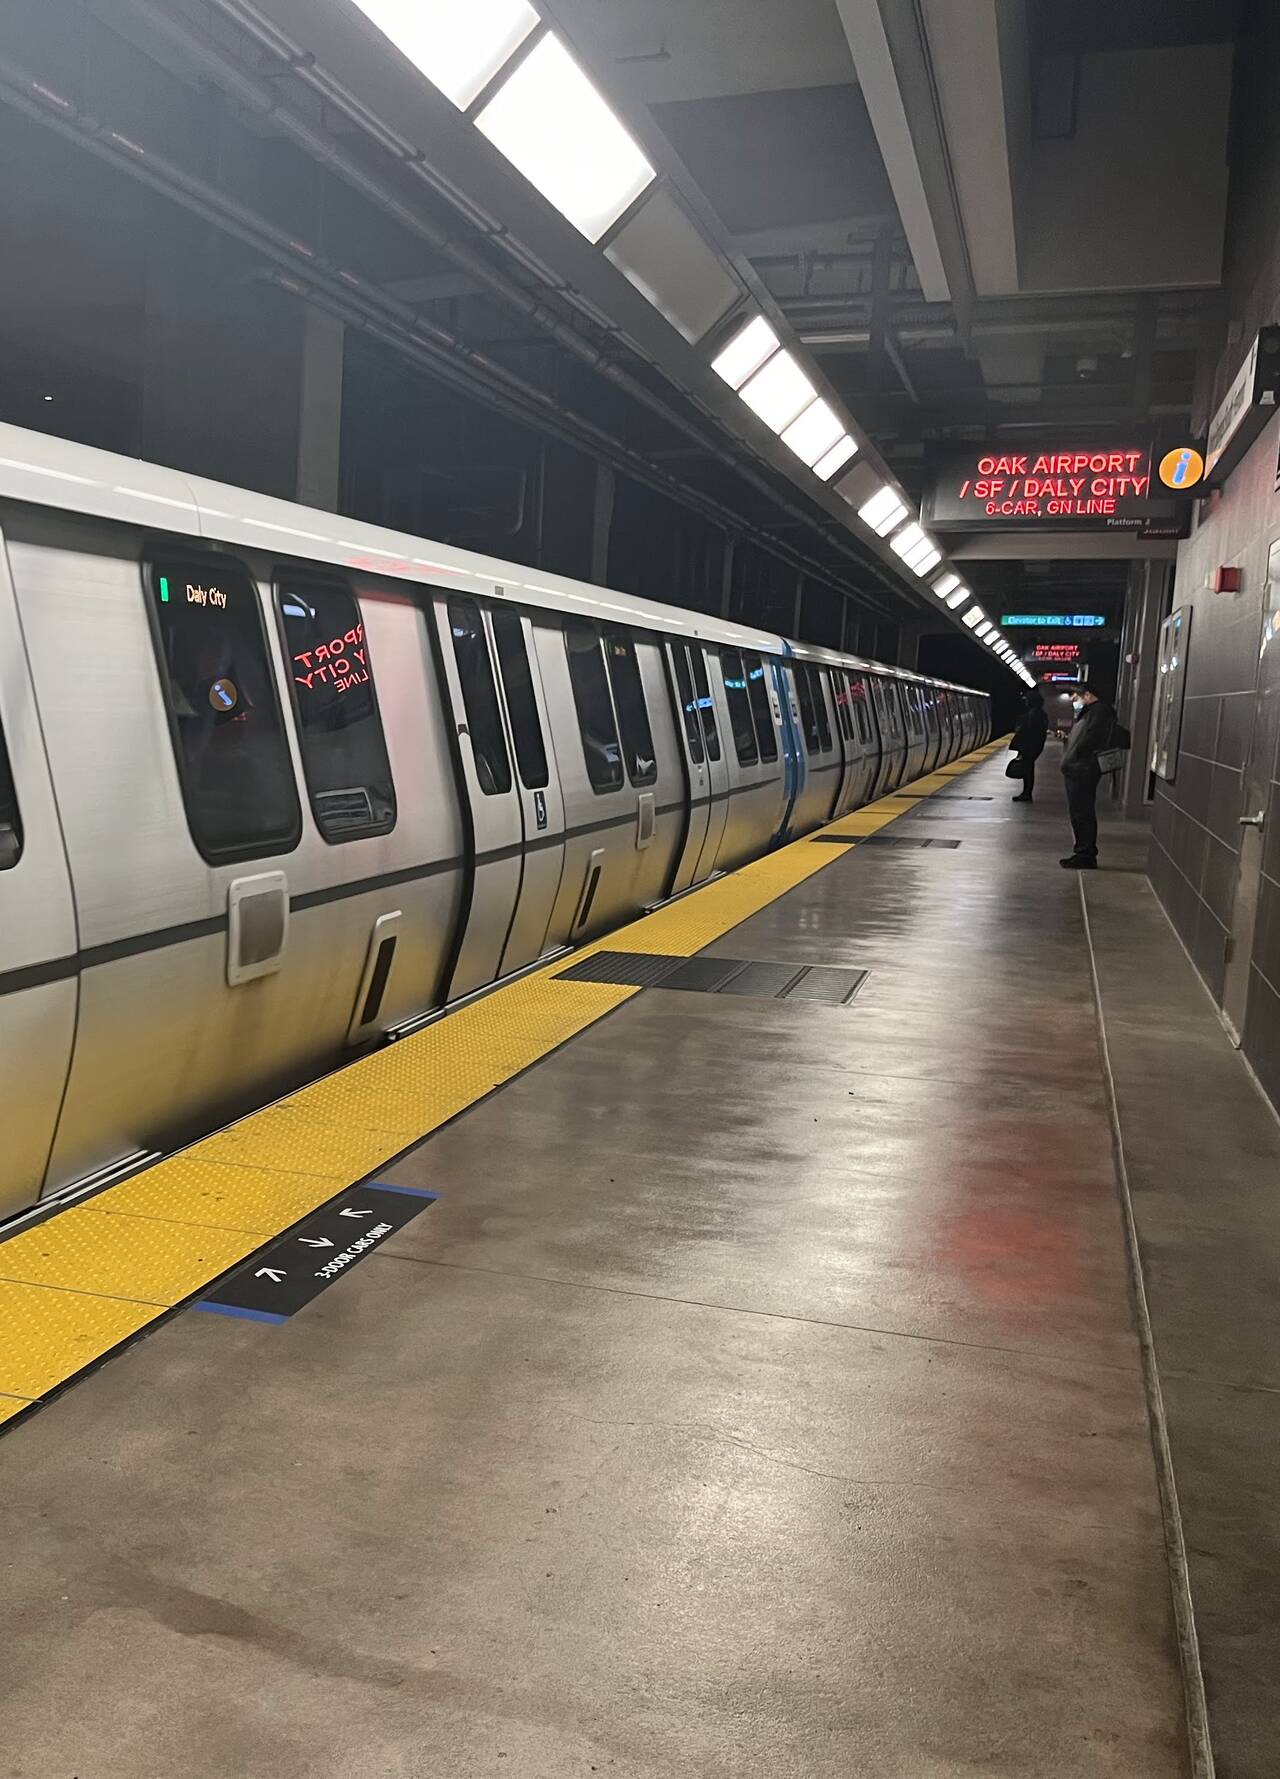 The BART arrives at Warm Springs/South Fremont